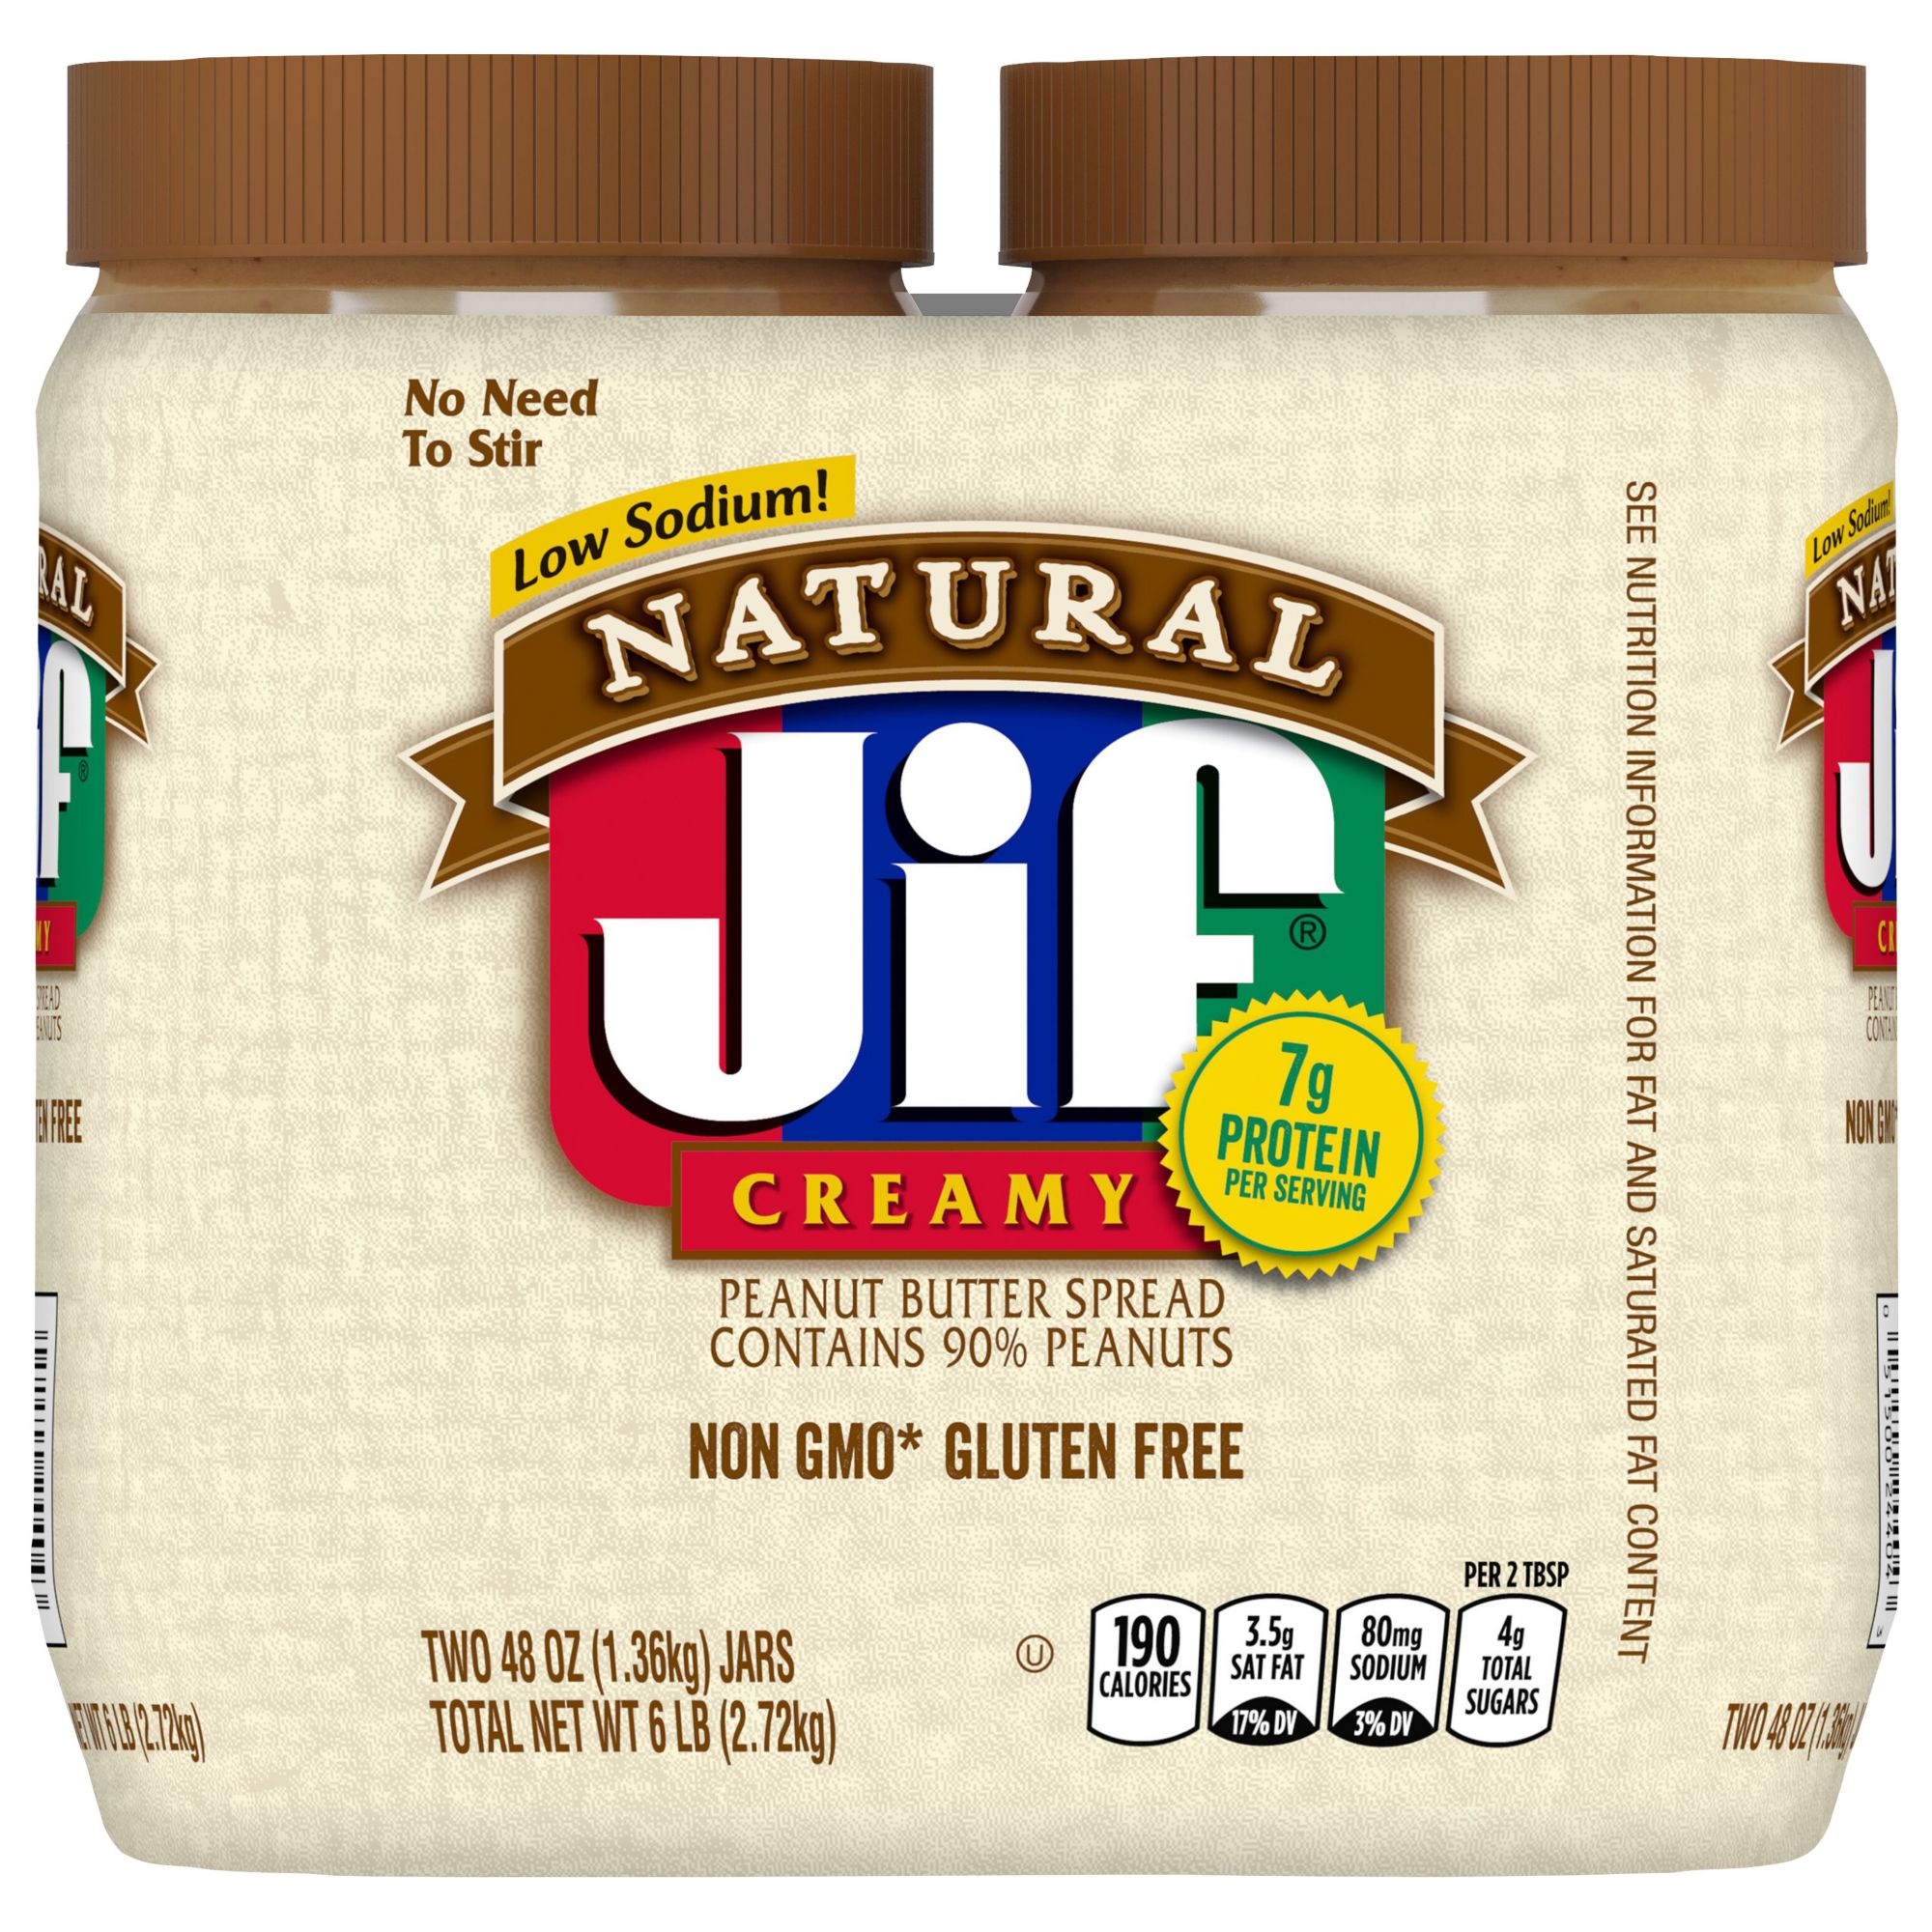 Jif Natural Creamy Peanut Butter, 18 g Plastic Portion Control Cup